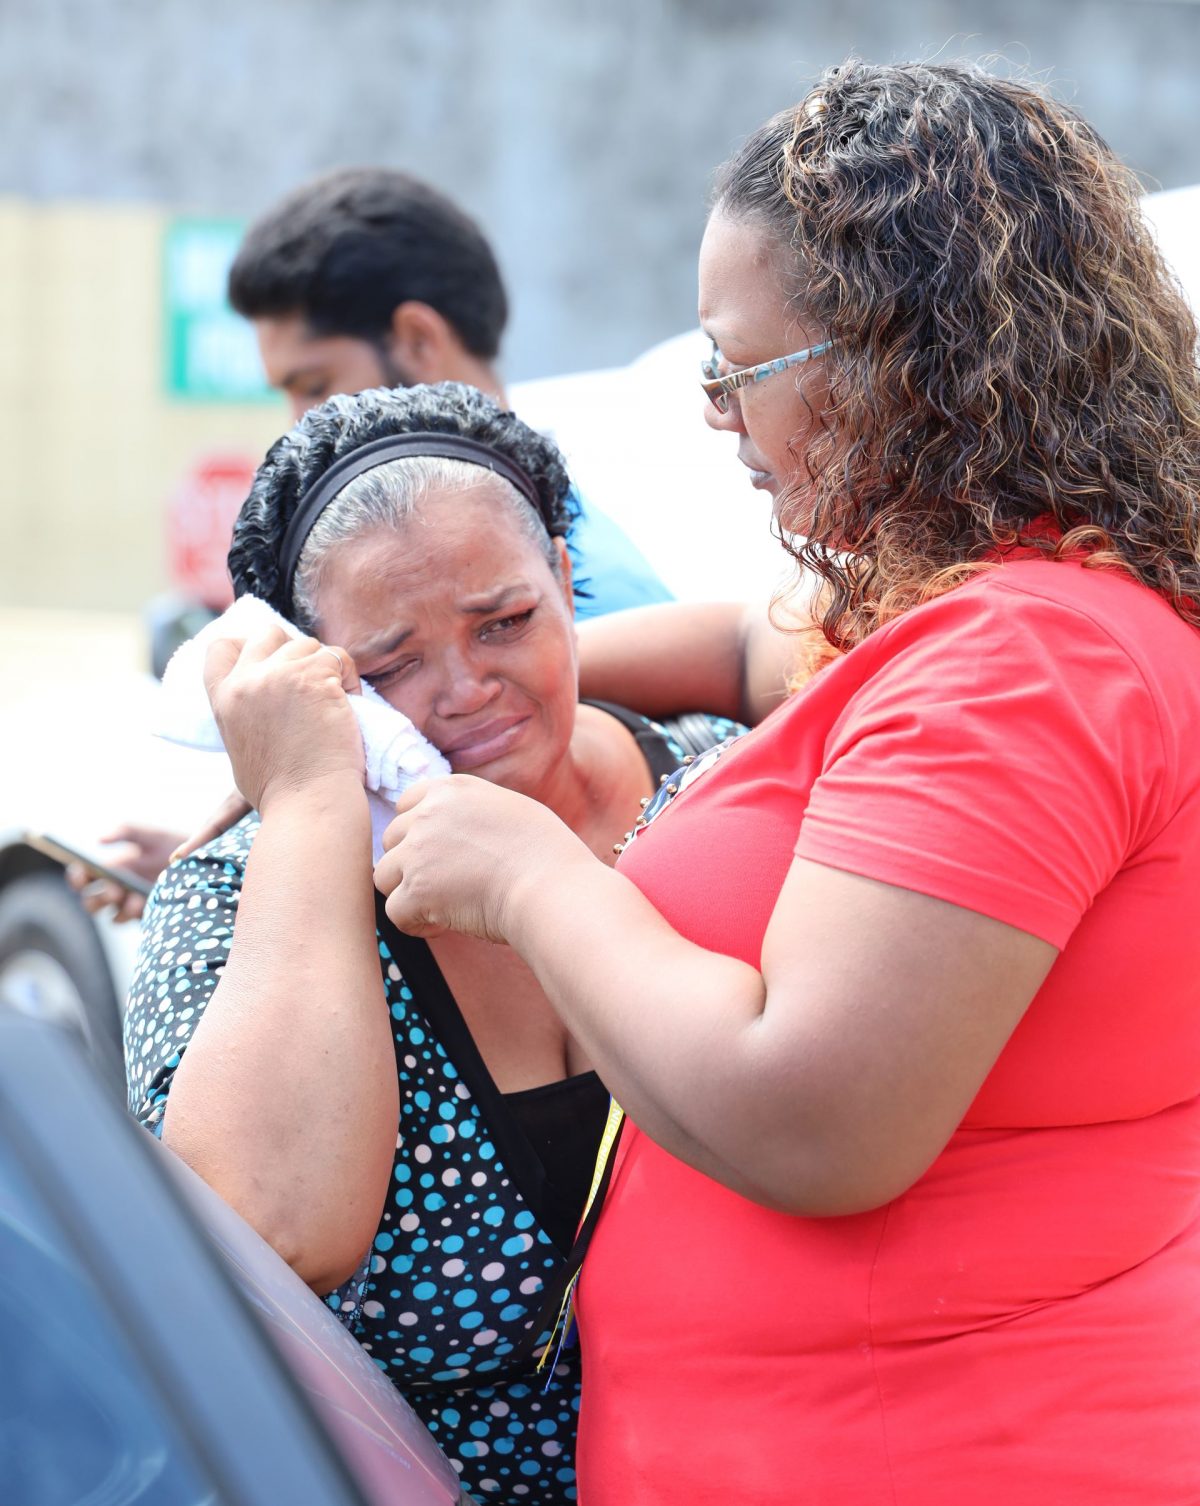 Paula Chuniesingh, left, is consoled by a relative after viewing the bodies of her children Pollyann and Damian Chuniesingh, at the Forensic Science Centre, St James, yesterday.